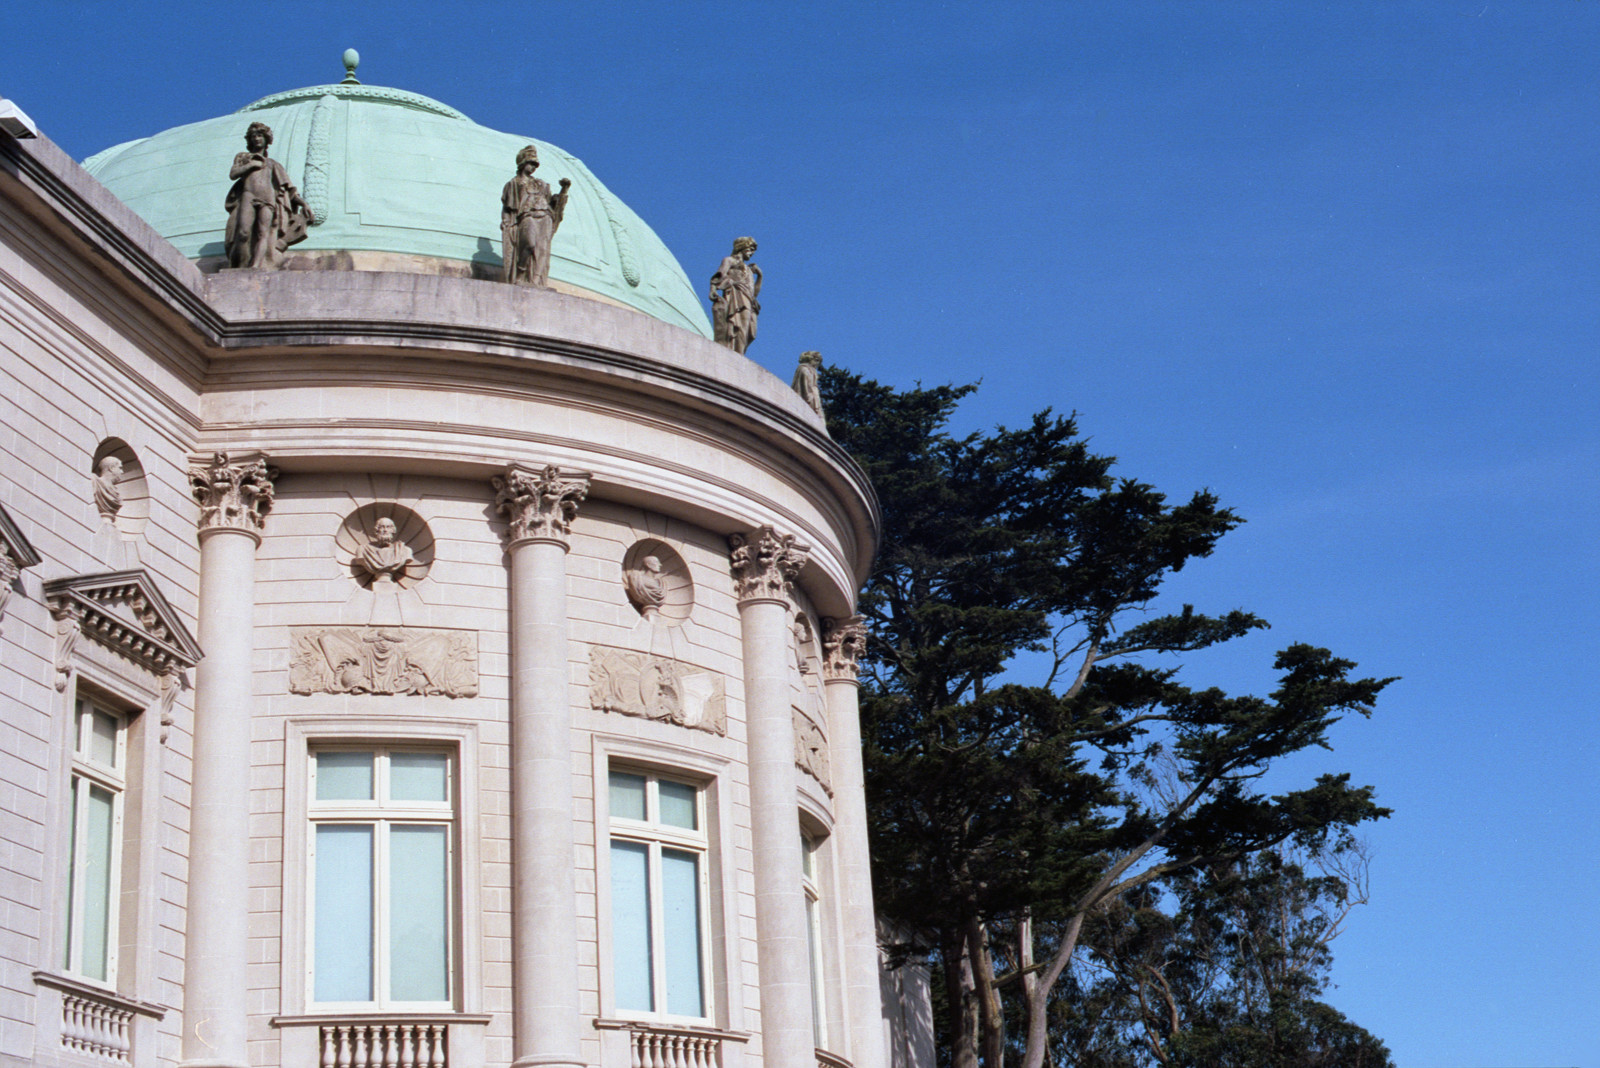 The Rotunda, on the west elevation of the California Palace of the Legion of Honor, is decorated with six classical statues standing on the abacus of the green-oxidized bronze dome. This side of the building faces the Ocean.